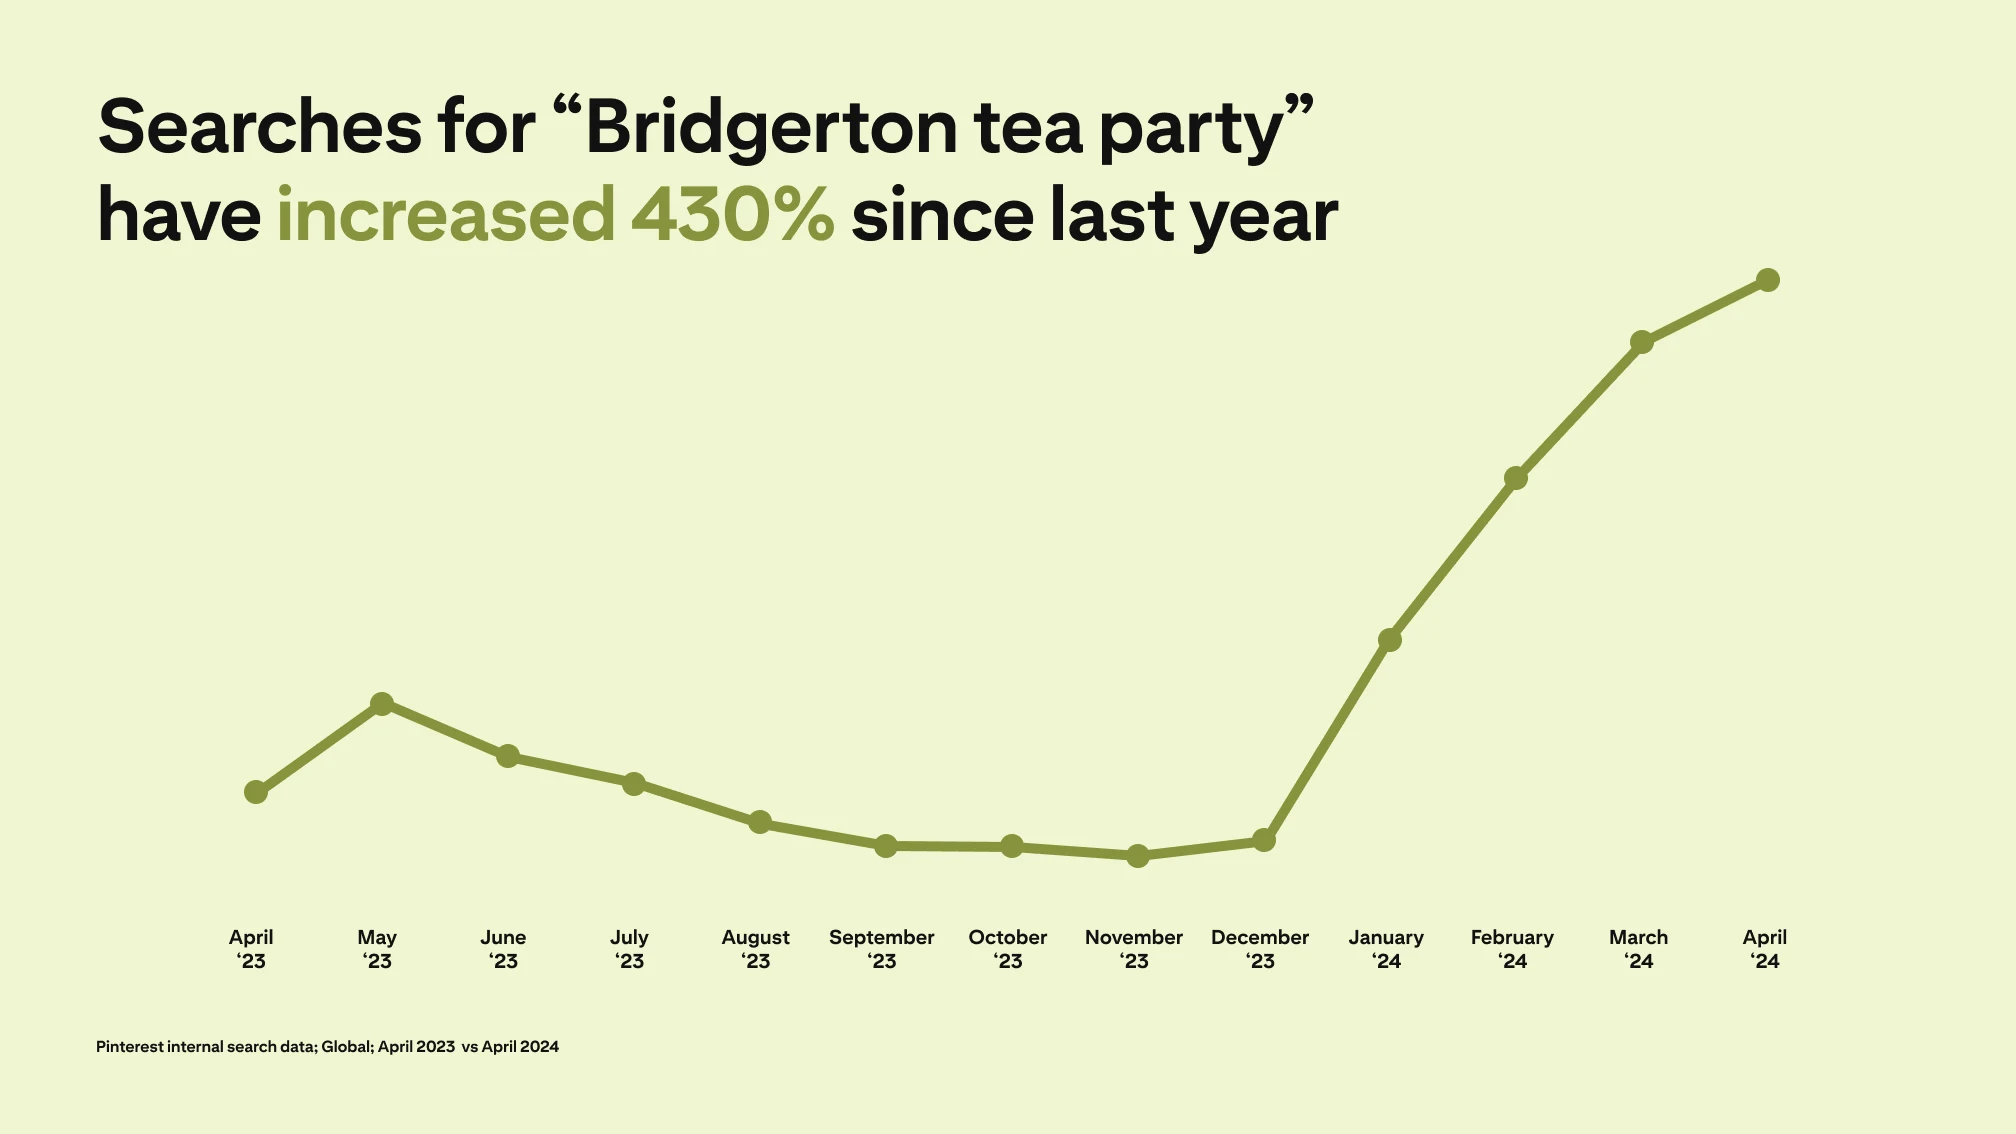 A line graph depicts searches for "Bridgerton tea party" increasing 430% since last year